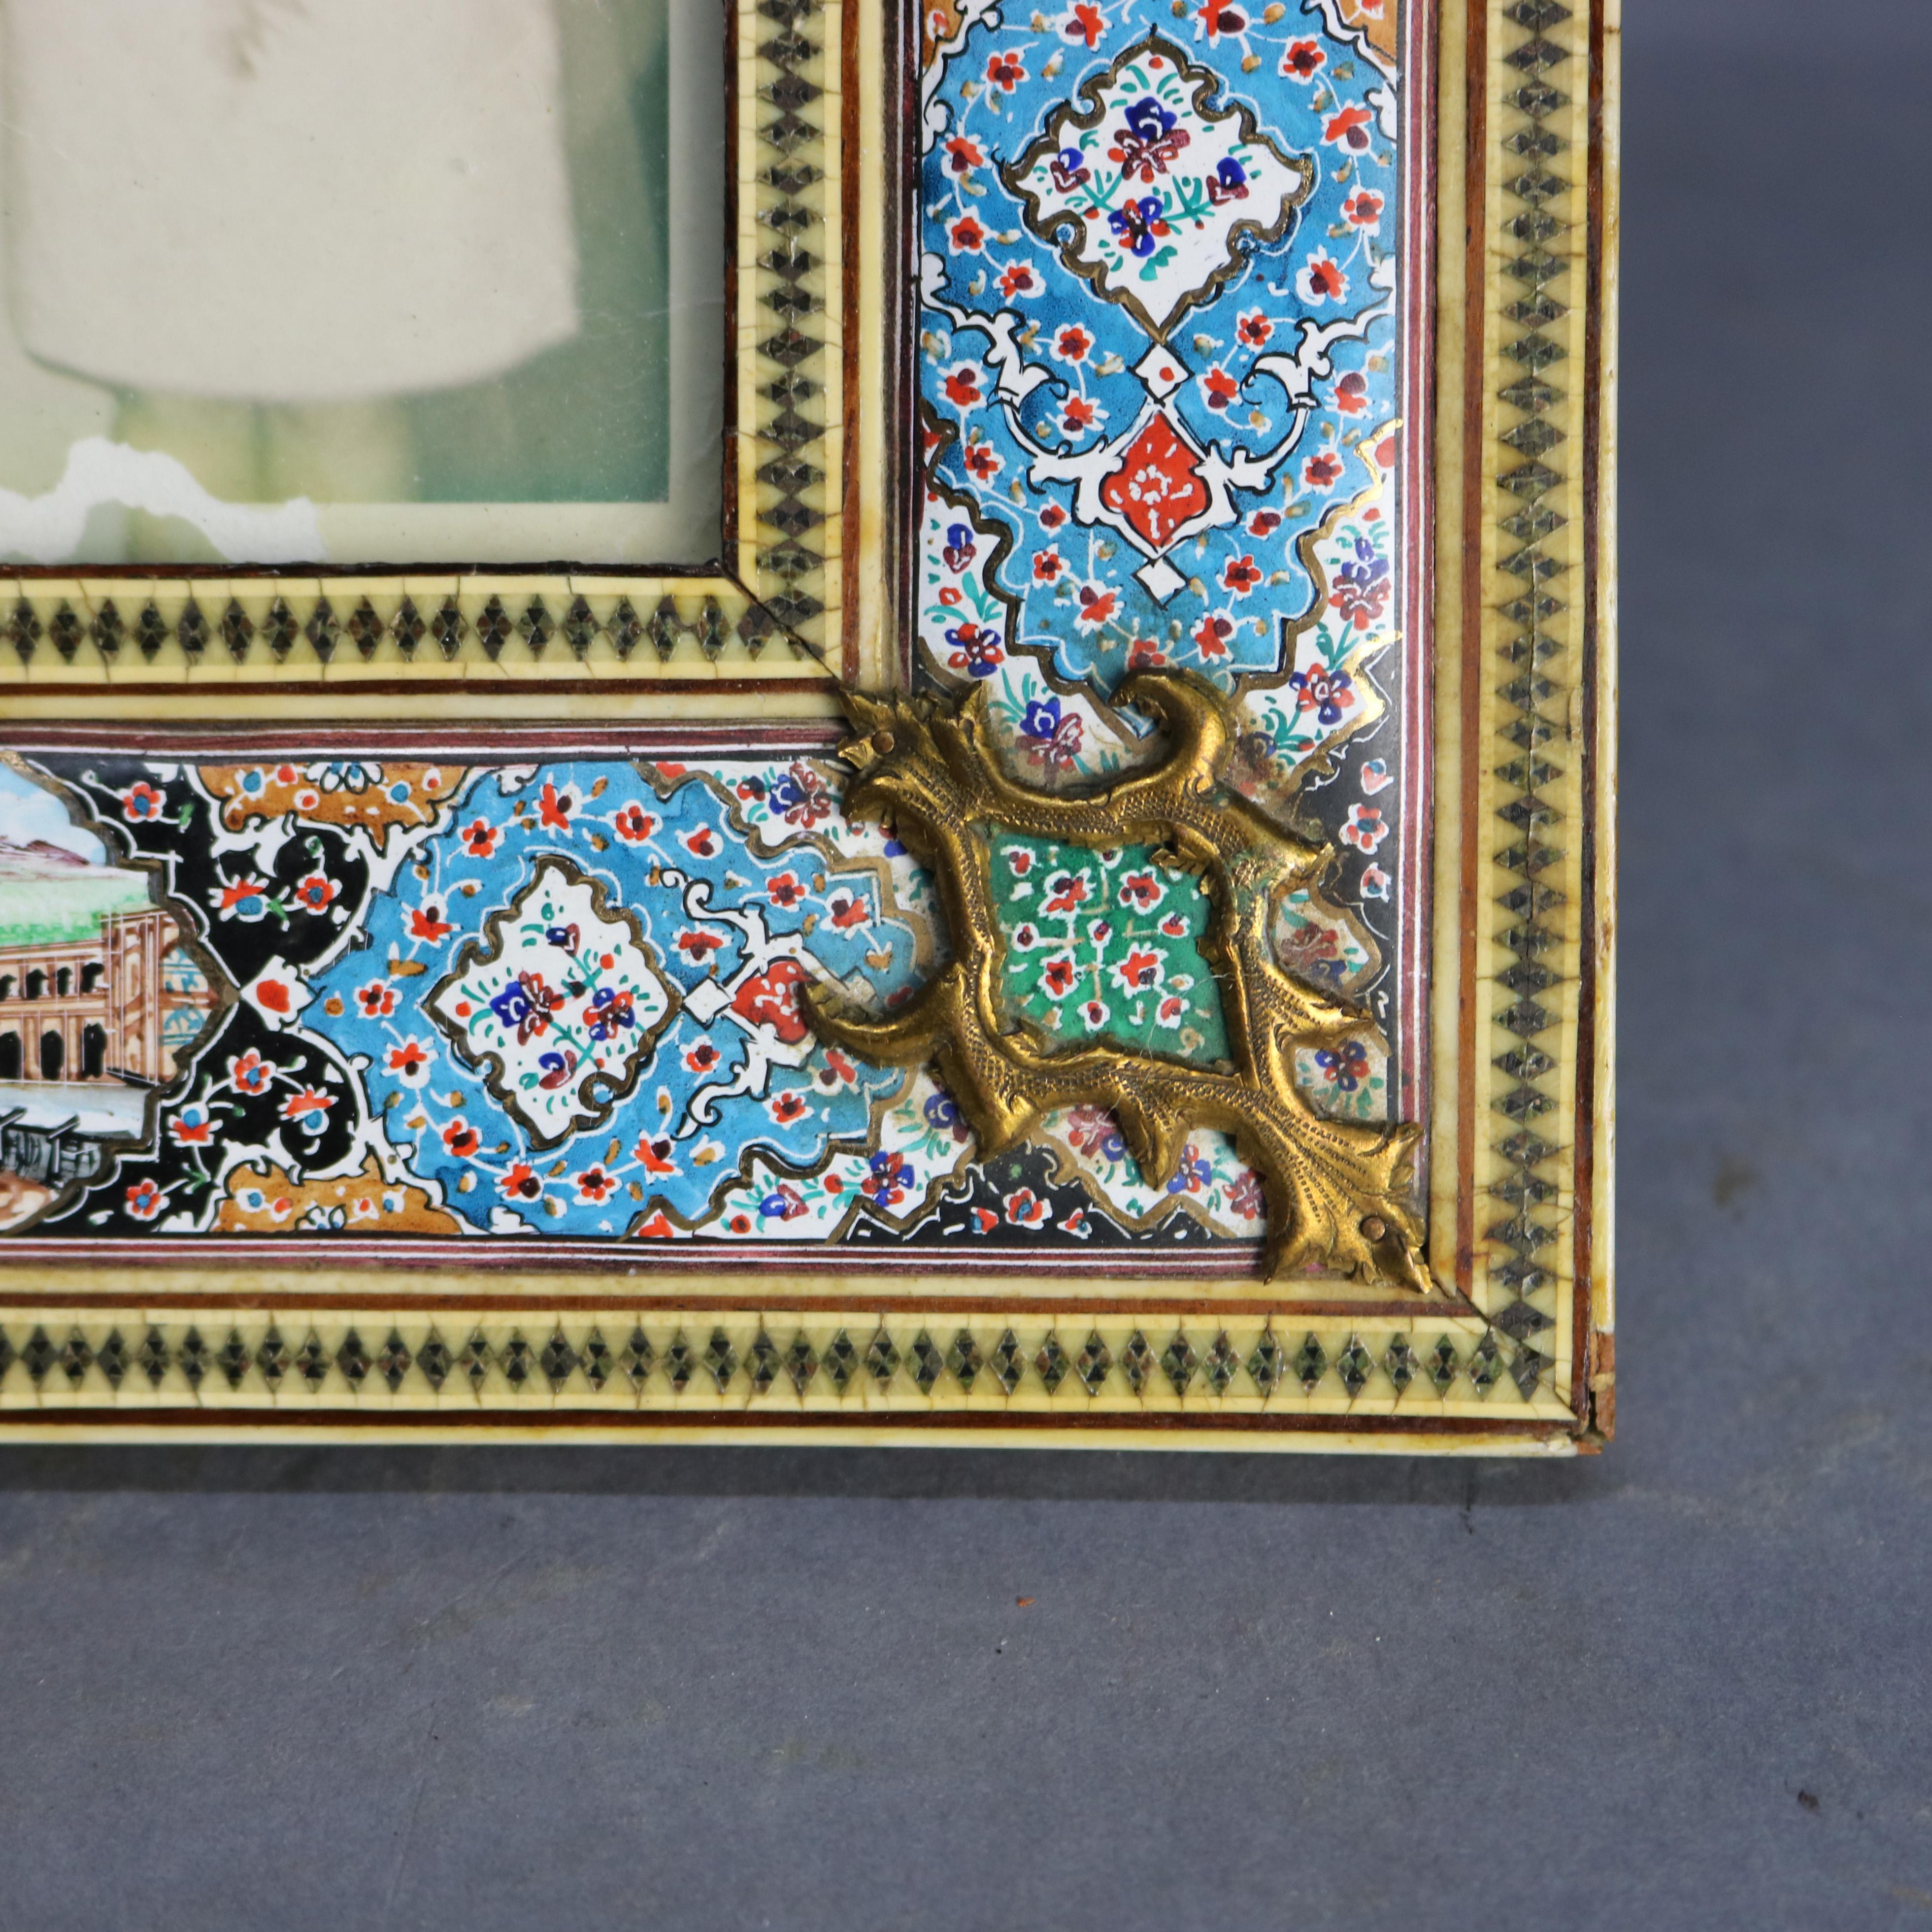 Antique Persian Pictorial Enamel on Copper Picture Frame, 19th Century 1